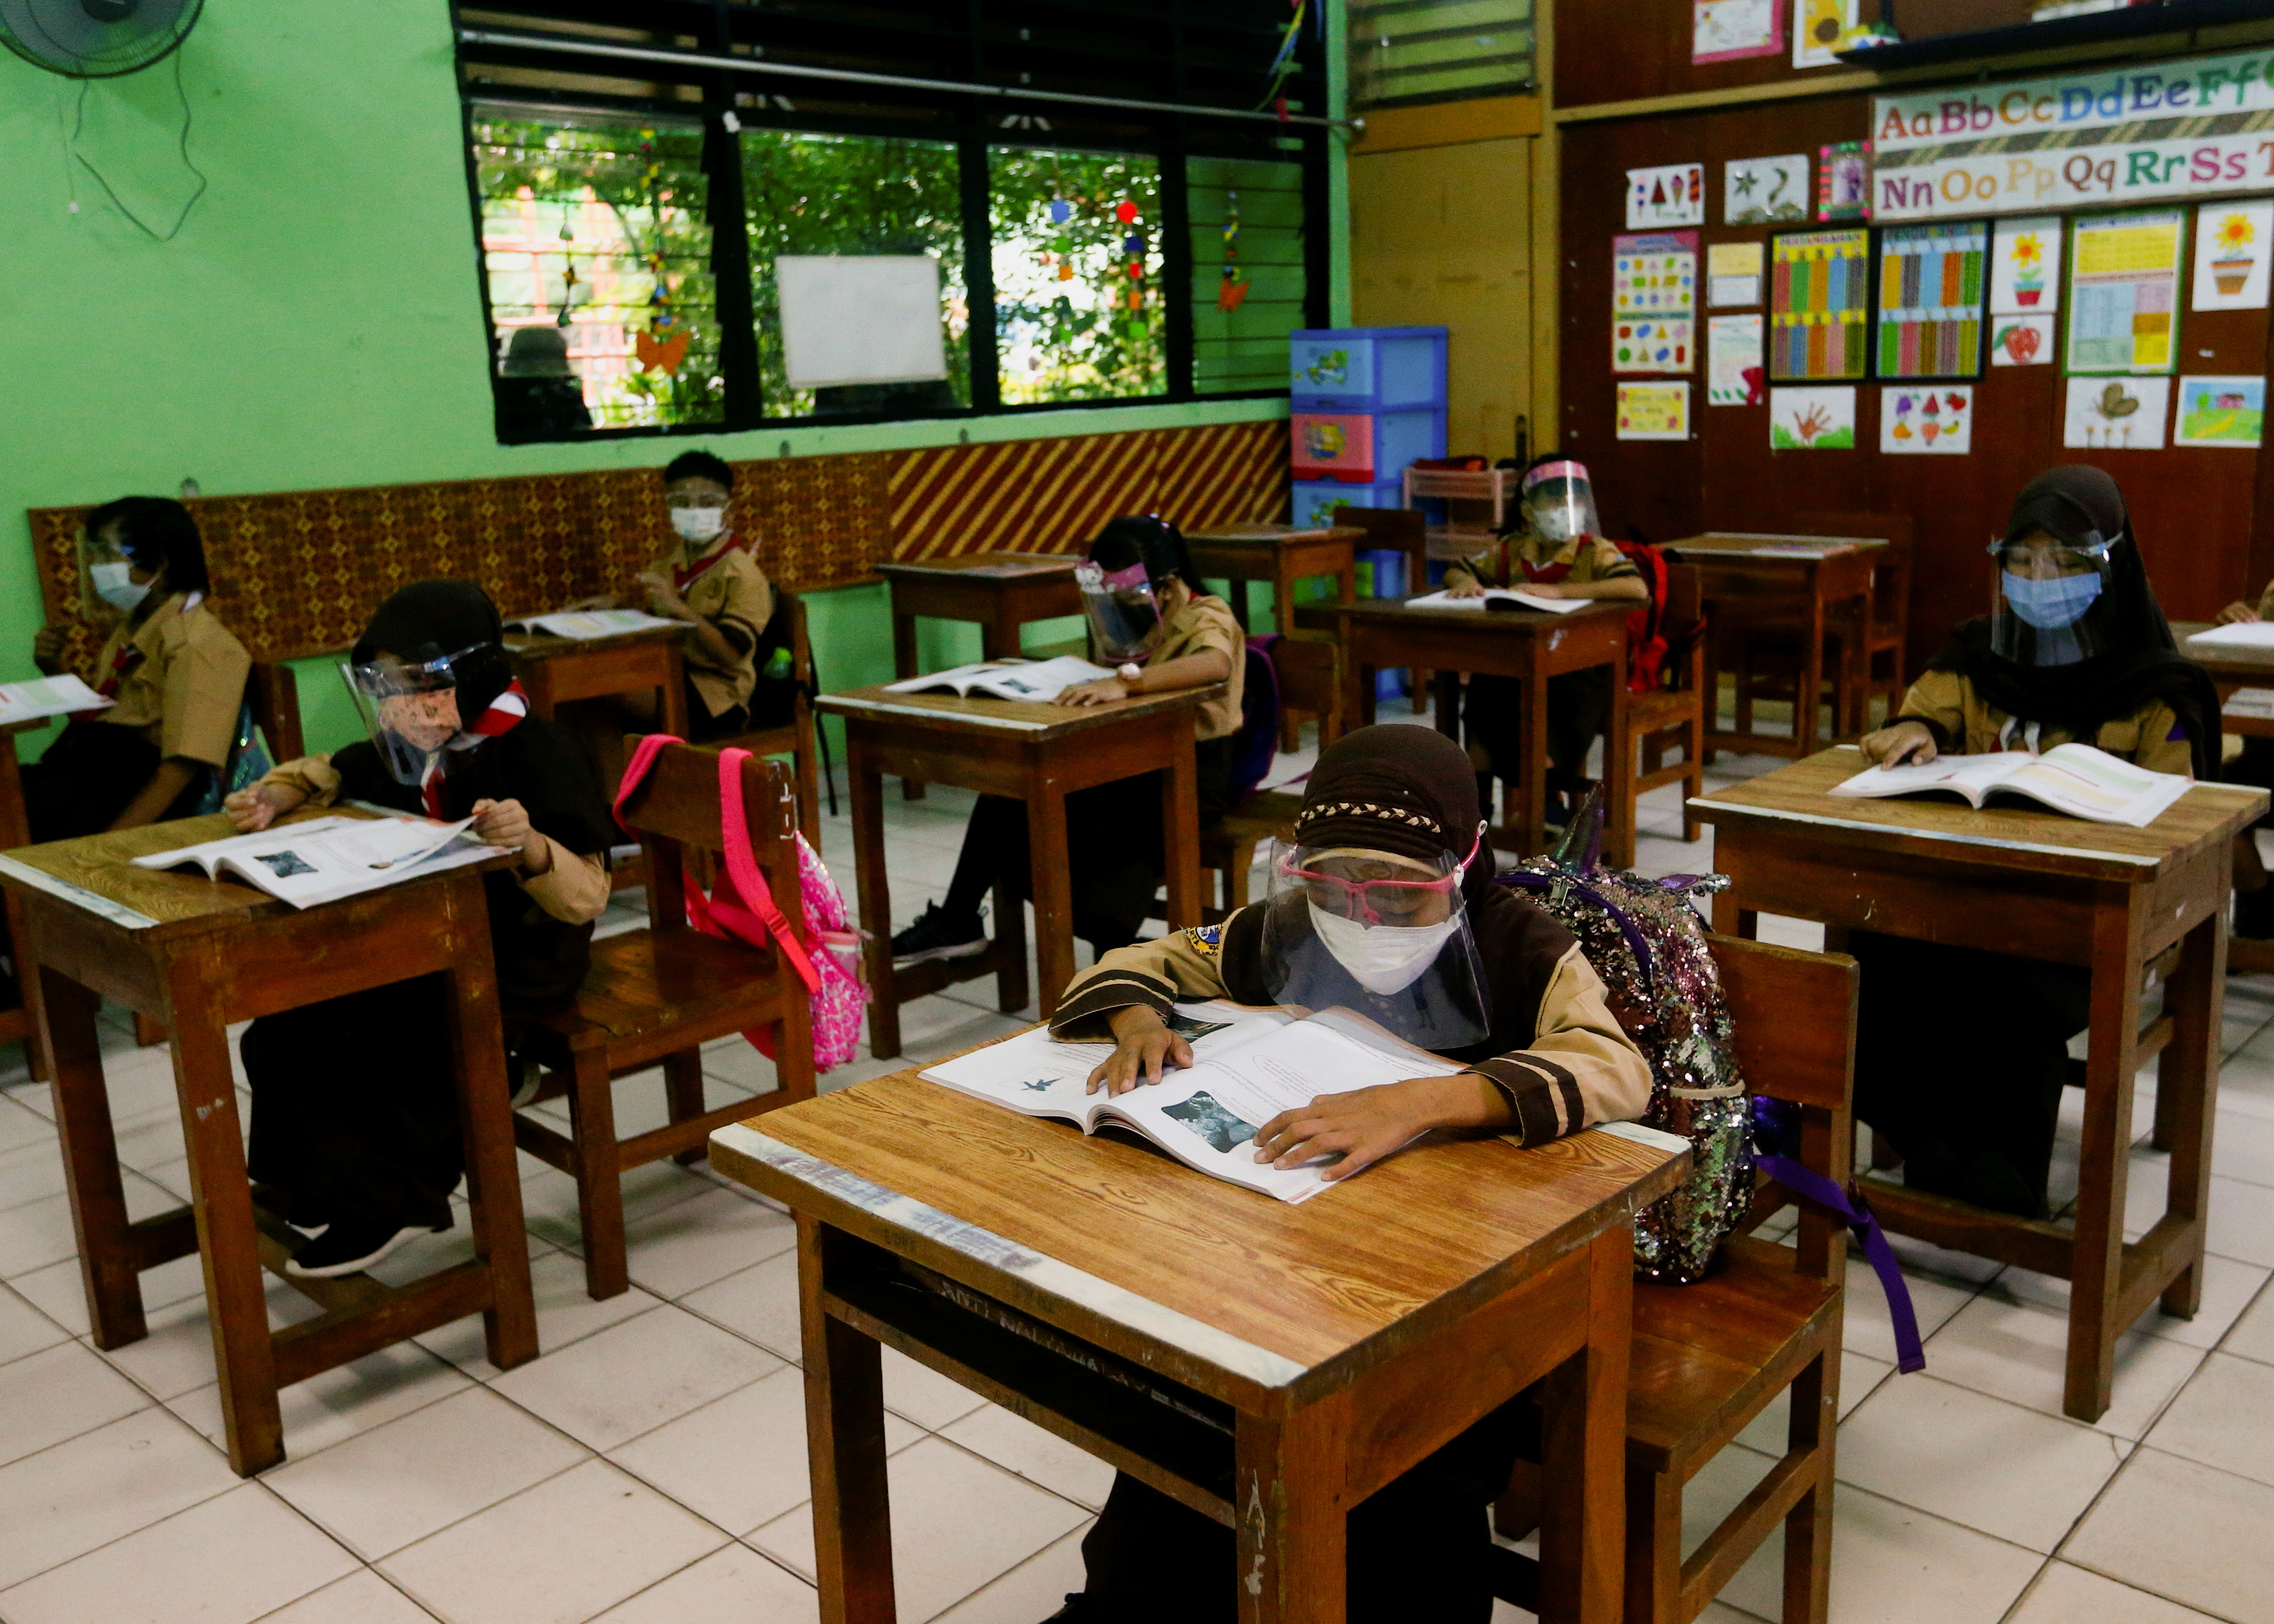 Elementary school students wearing face masks and face shields attend class, as schools reopen amid the coronavirus disease (COVID-19) pandemic, in Jakarta